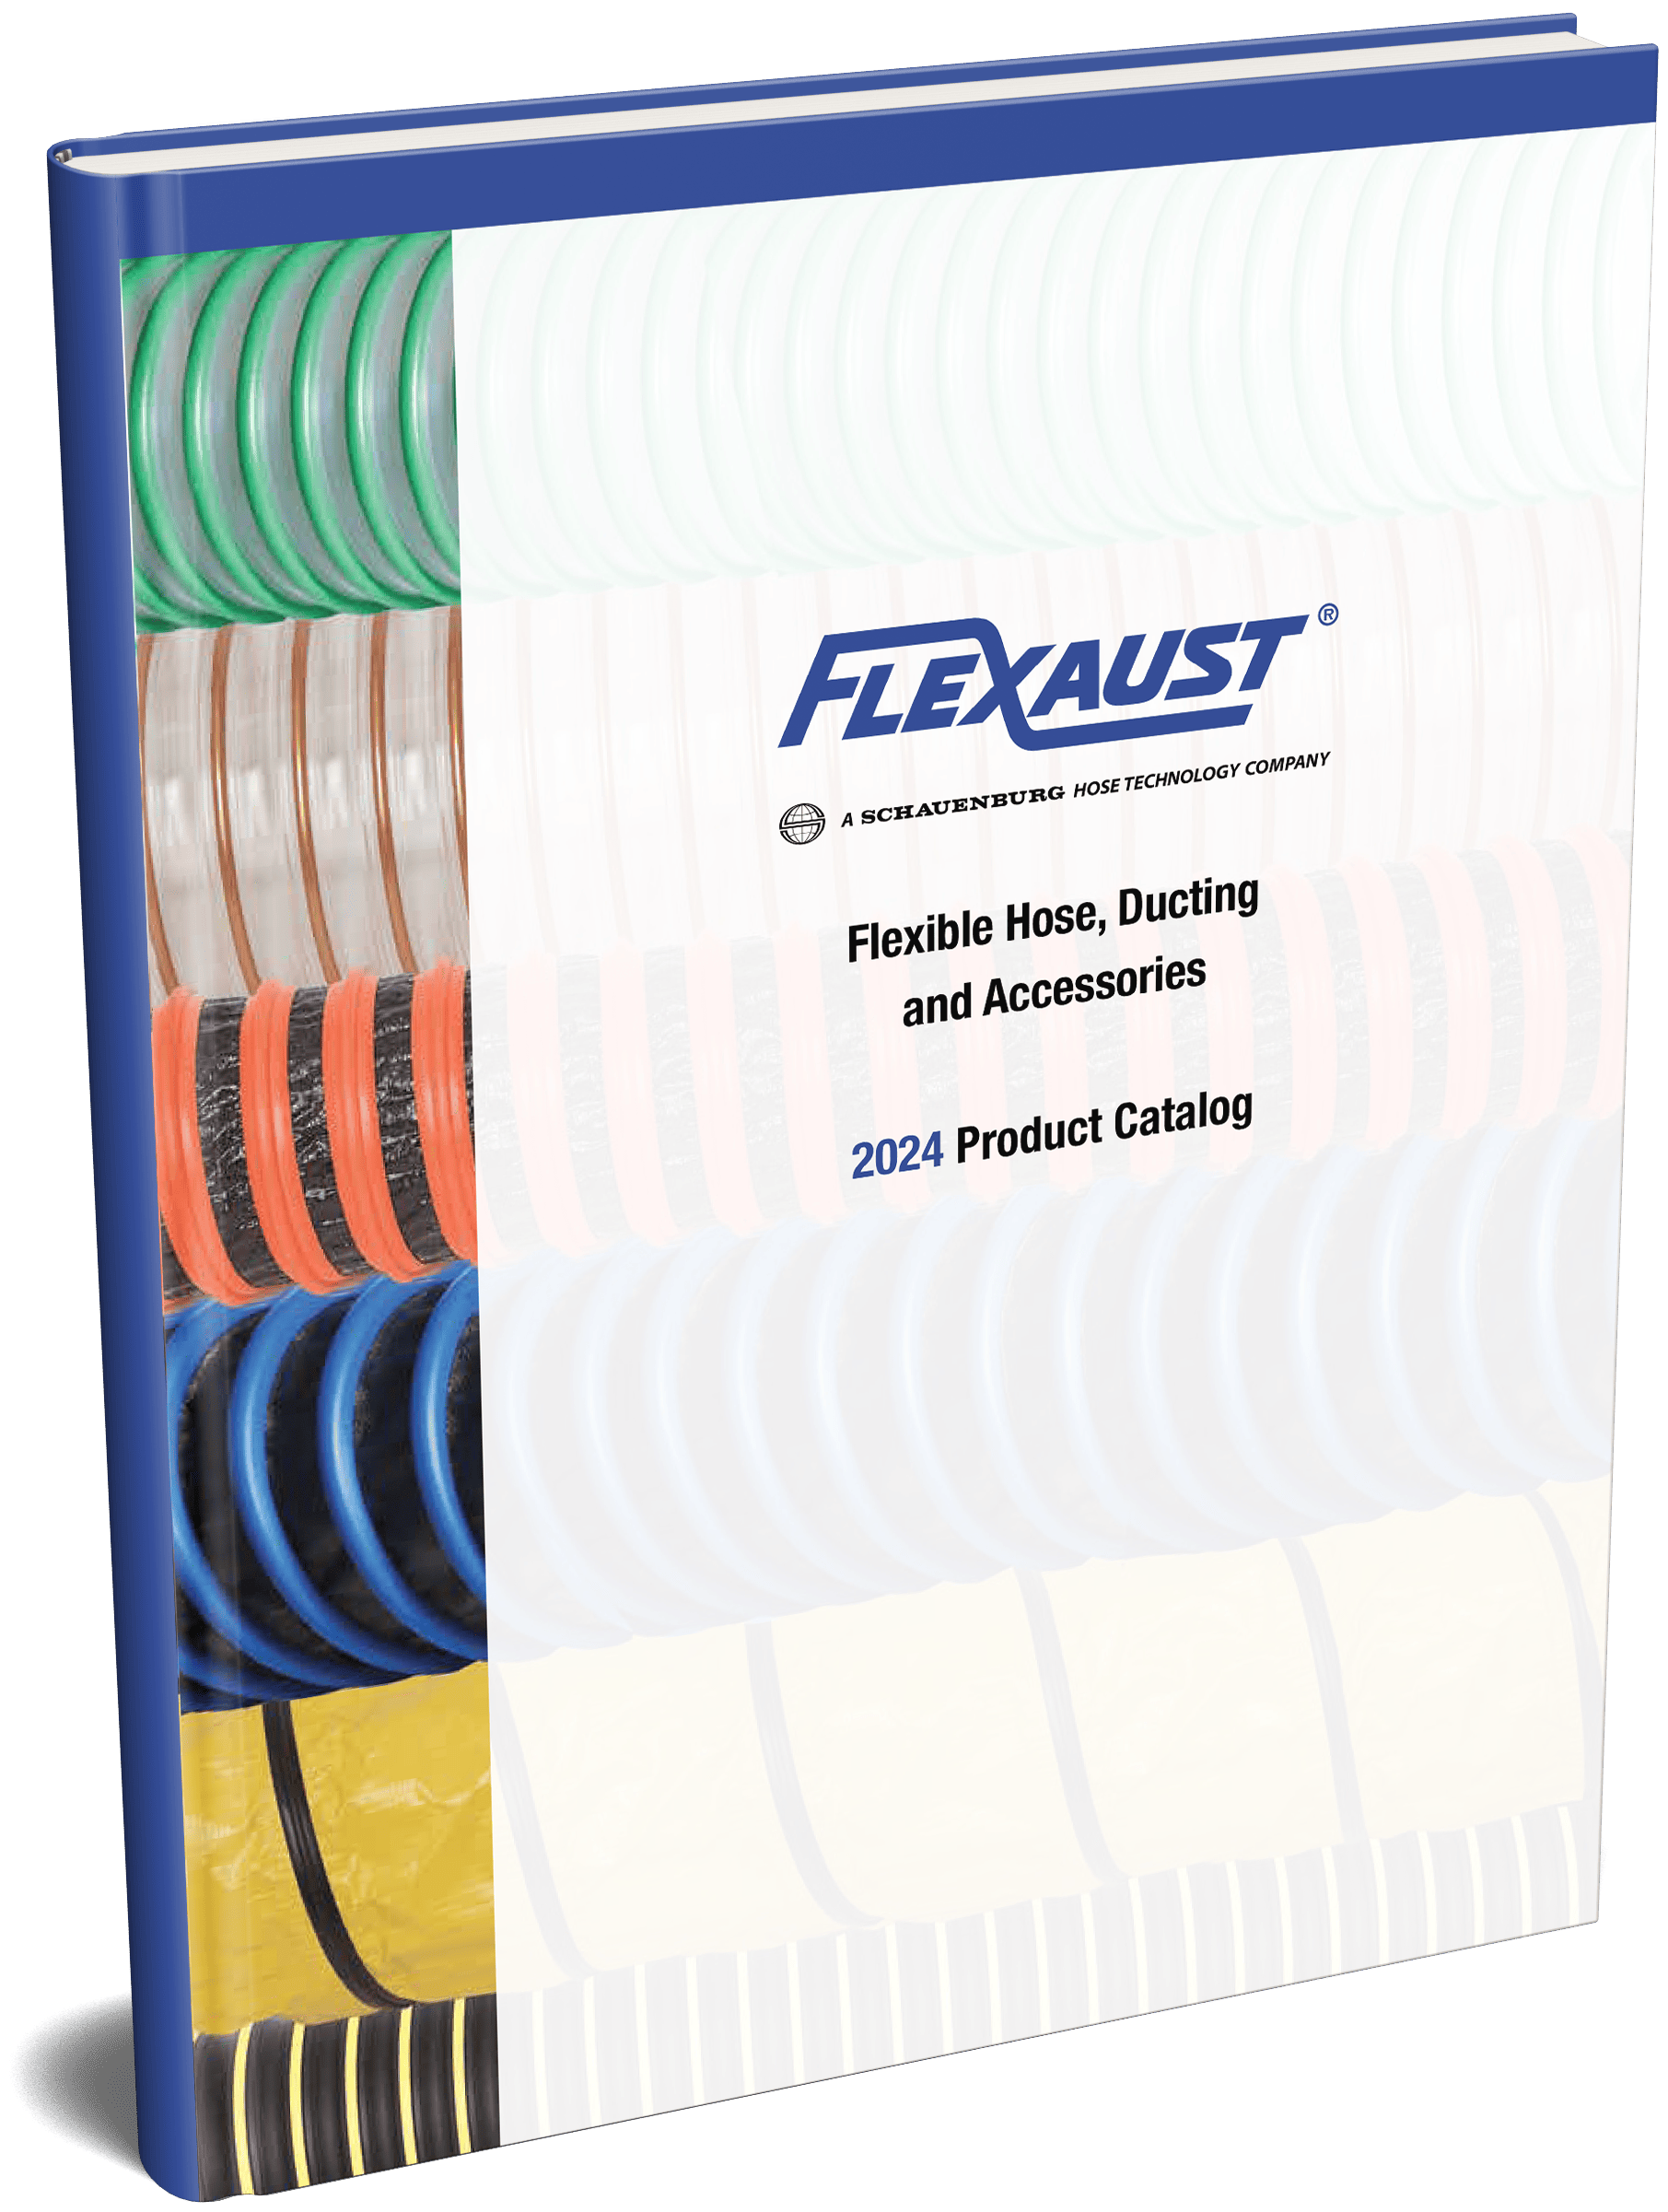 Flexible Hose, Ducting and Accessories